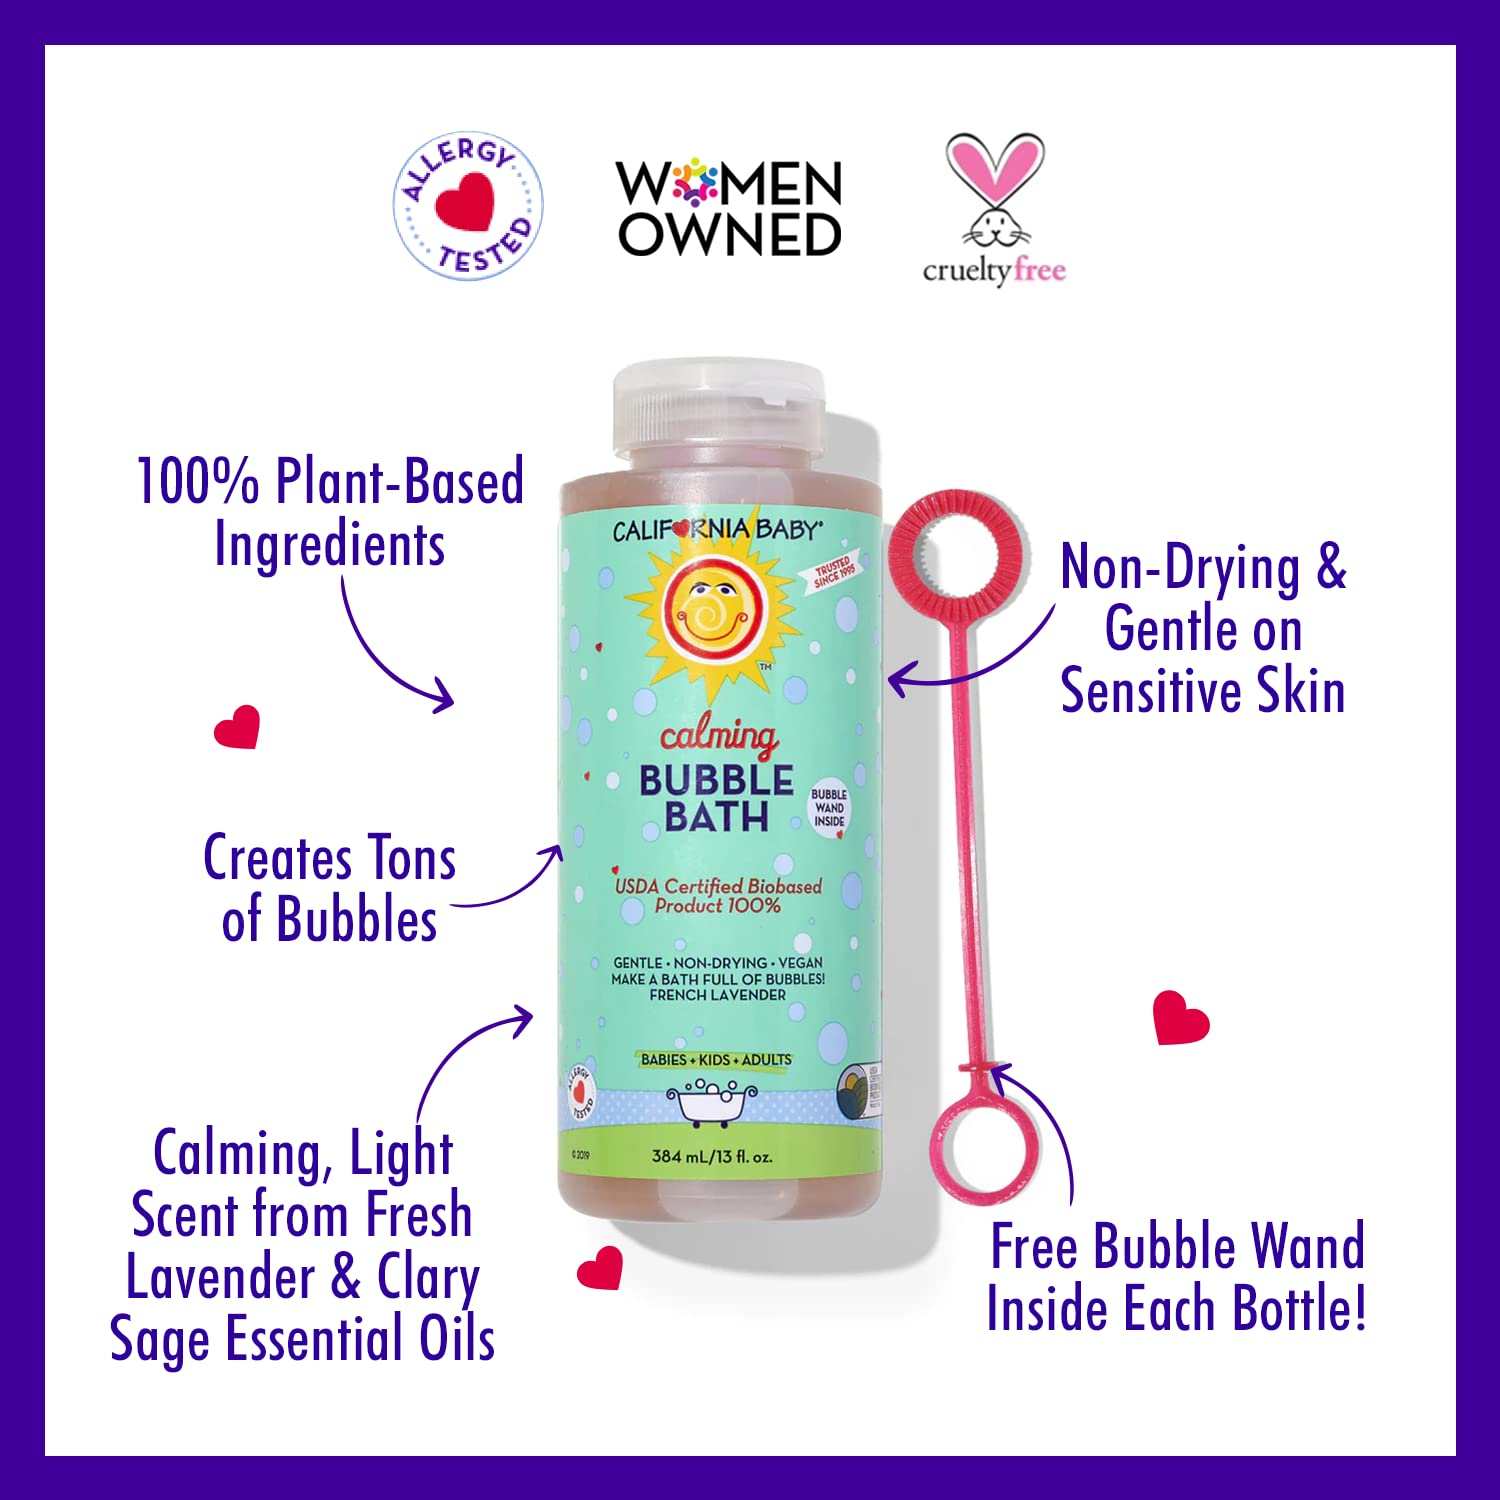 California Baby Calming Bubble Bath | Calming Lavender Scent | 100% Plant-Based Ingredients (USDA Certified) | Allergy Friendly | Babies, Adults & Kids Bubble Bath | Ideal for Sensitive Skin | Free Bubble Wand Included | 384 mL / 13 fl. oz.